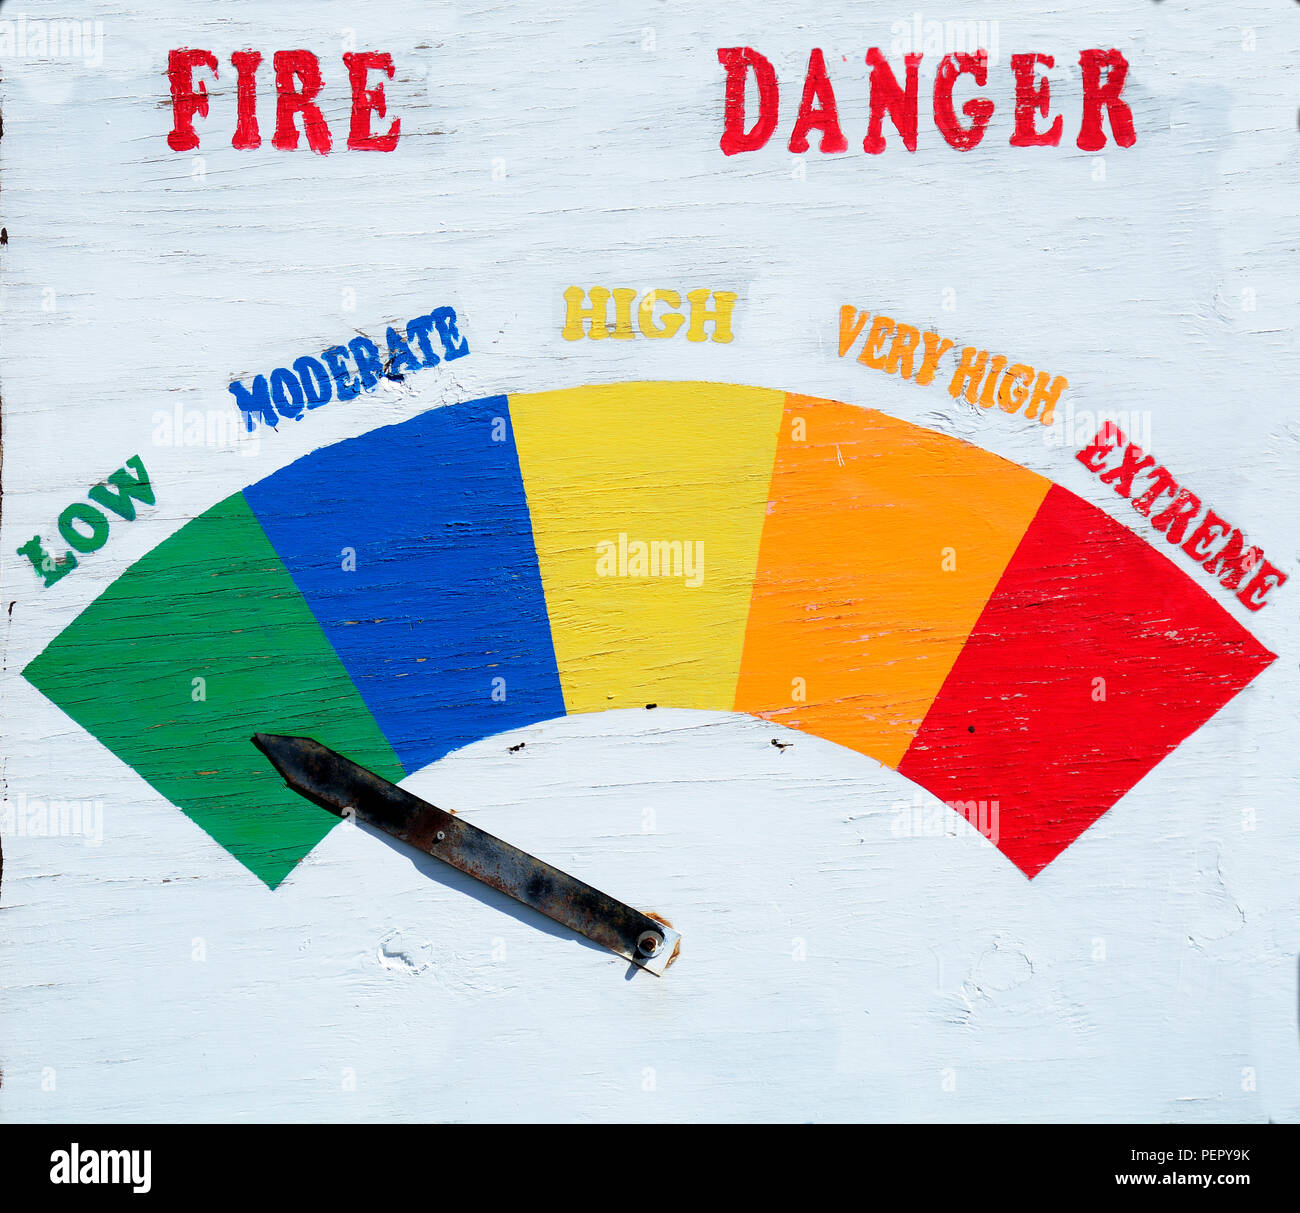 A handmade fire danger sign indicates that the fire danger is low. Stock Photo